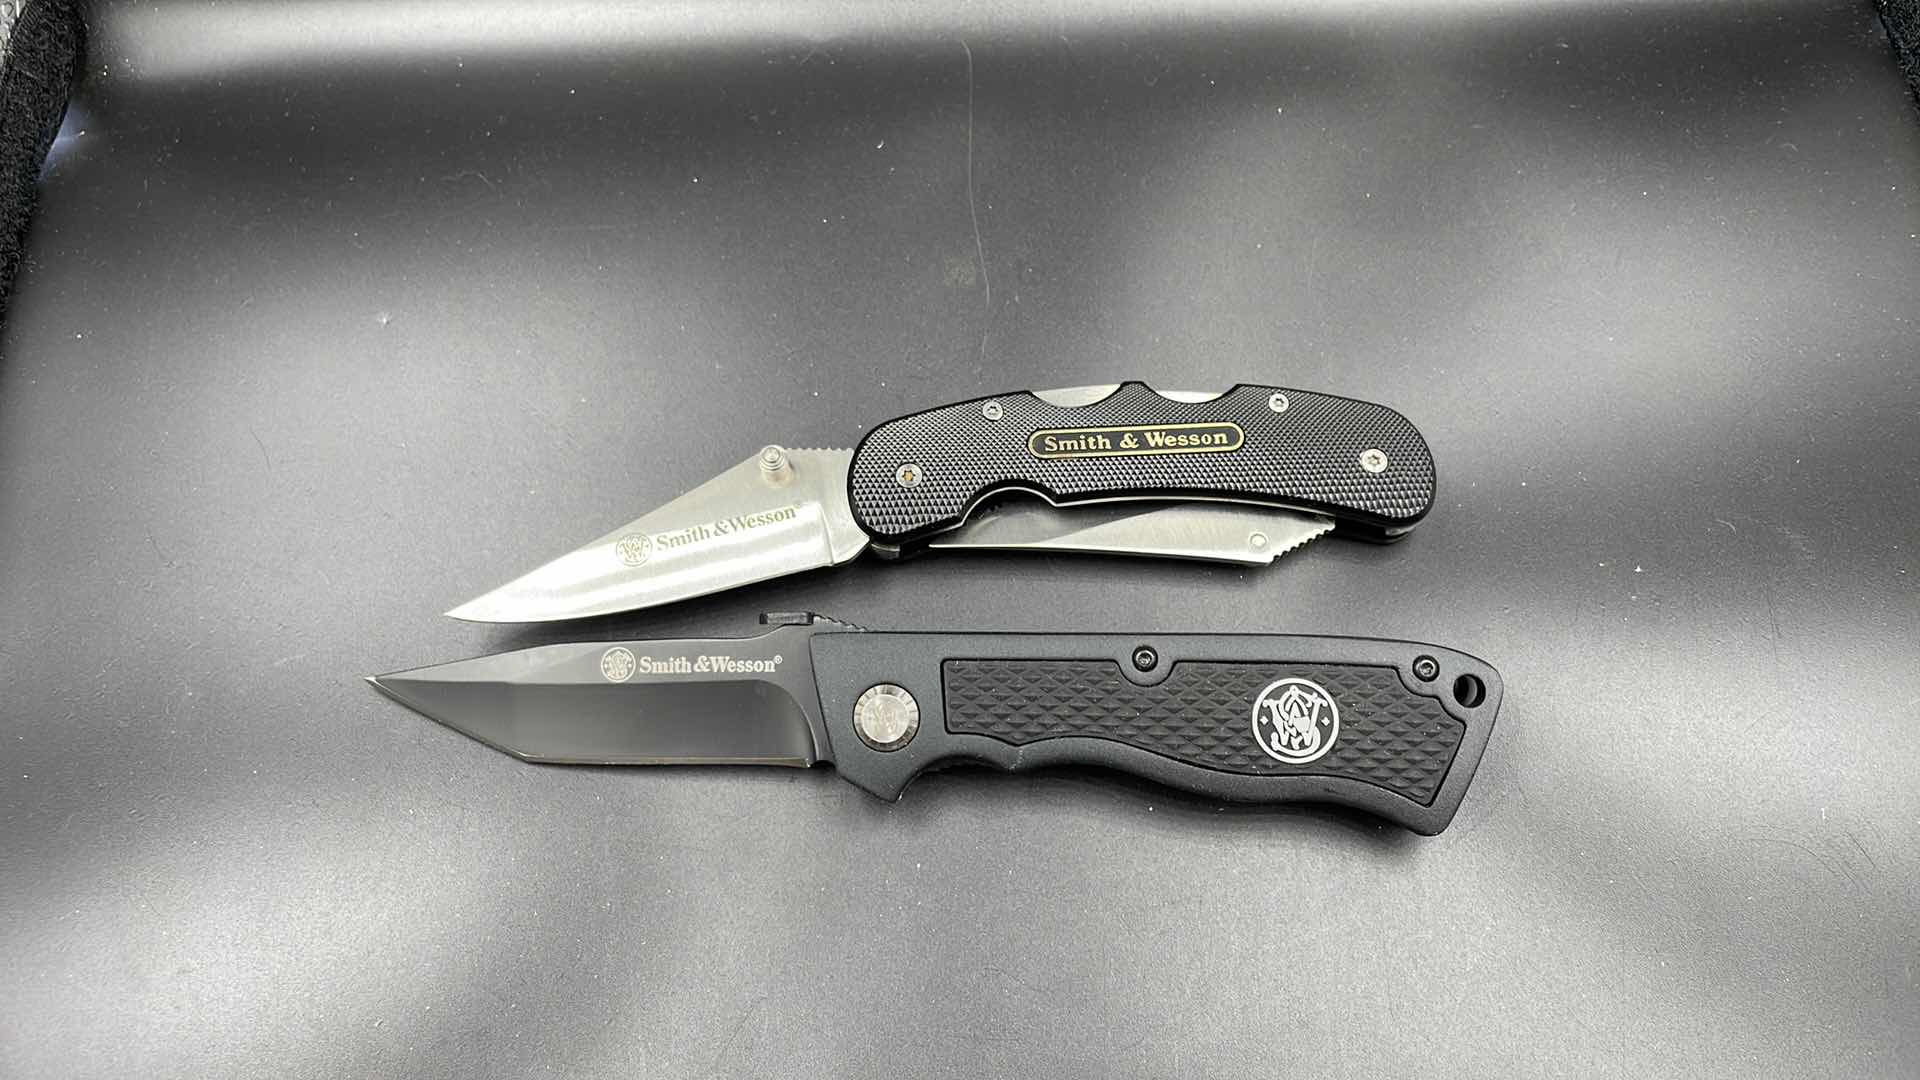 Photo 2 of PAIR OF SMITH & WESSON POCKET KNIVES